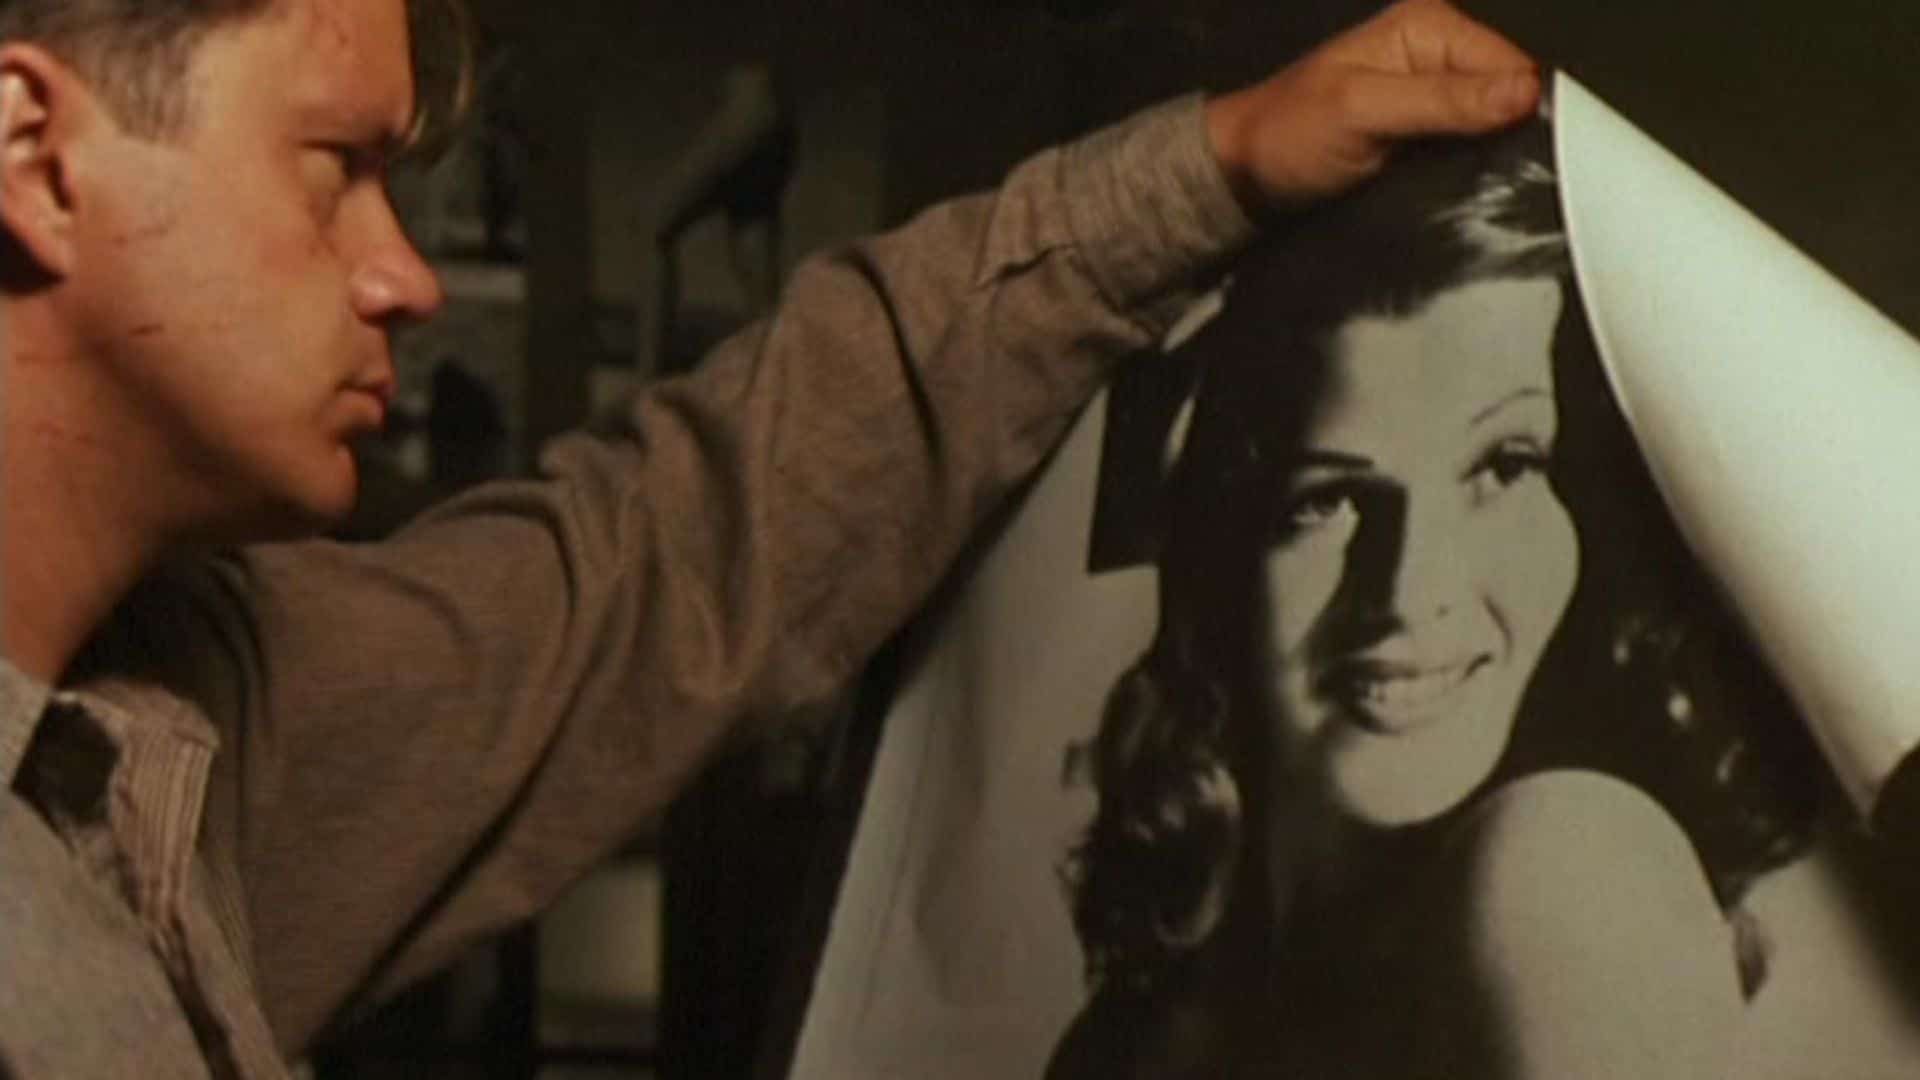 A man looks at a Rita Hayworth poster in this image from Castle Rock Entertainment.